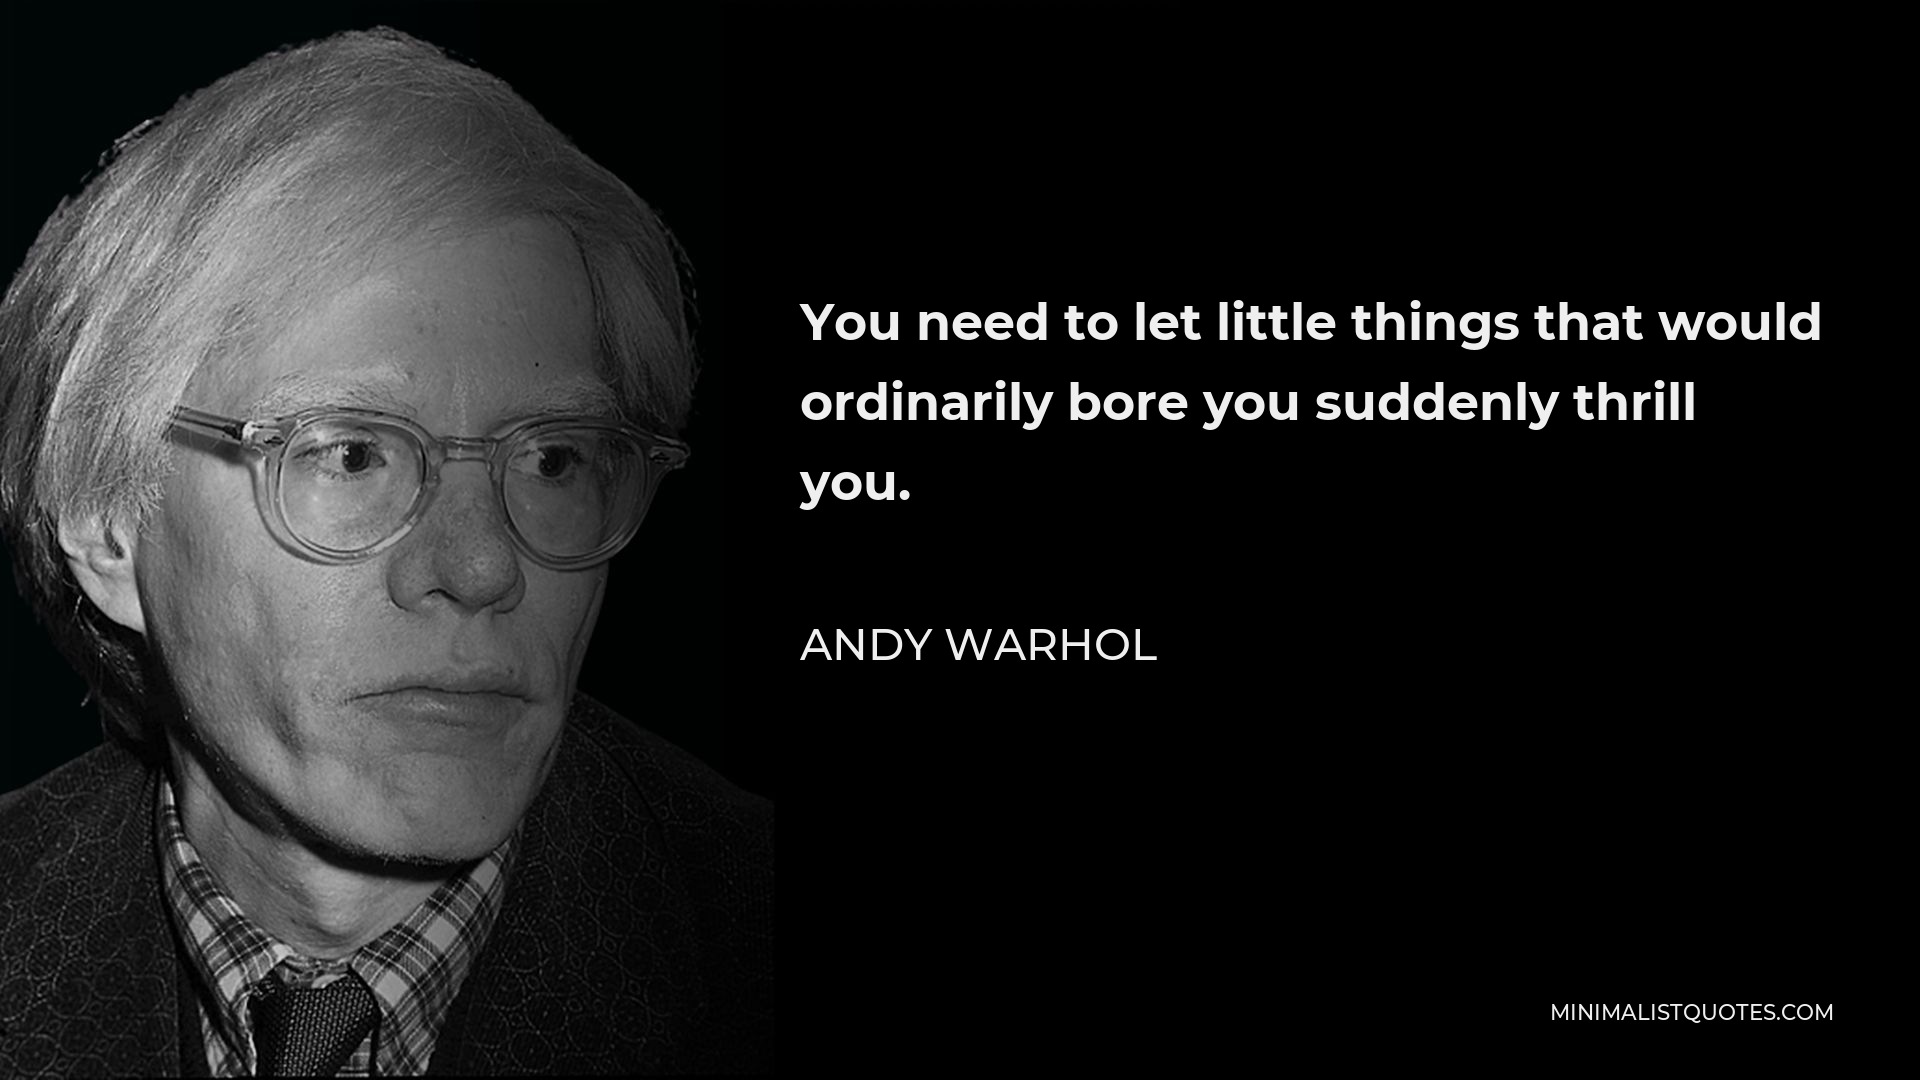 Andy Warhol Quote - You need to let little things that would ordinarily bore you suddenly thrill you.